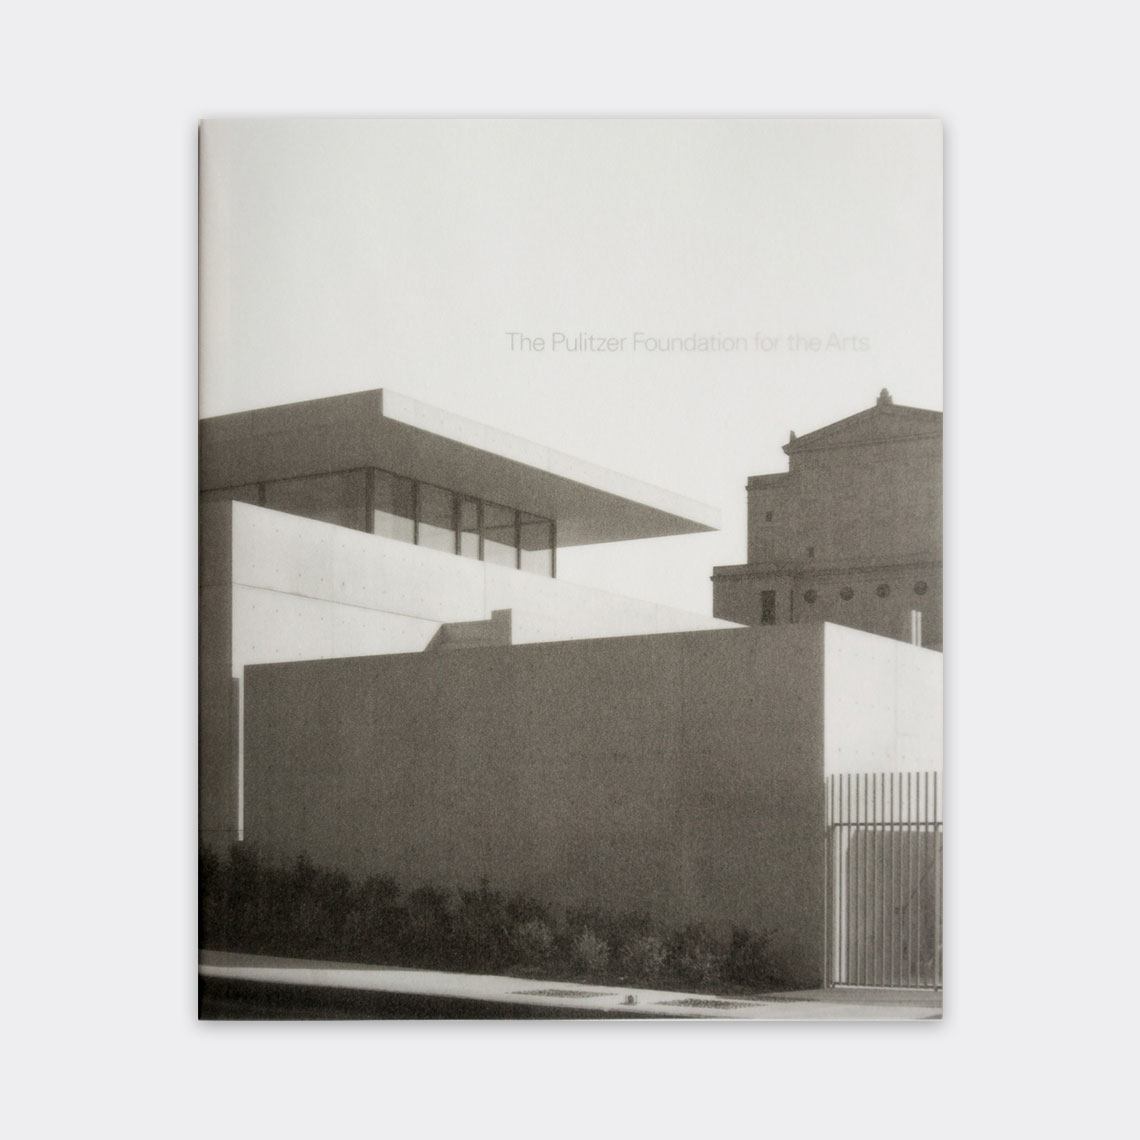 The book cover for "Abstractions in Space: Tadao Ando, Ellsworth Kelly, Richard Serra."